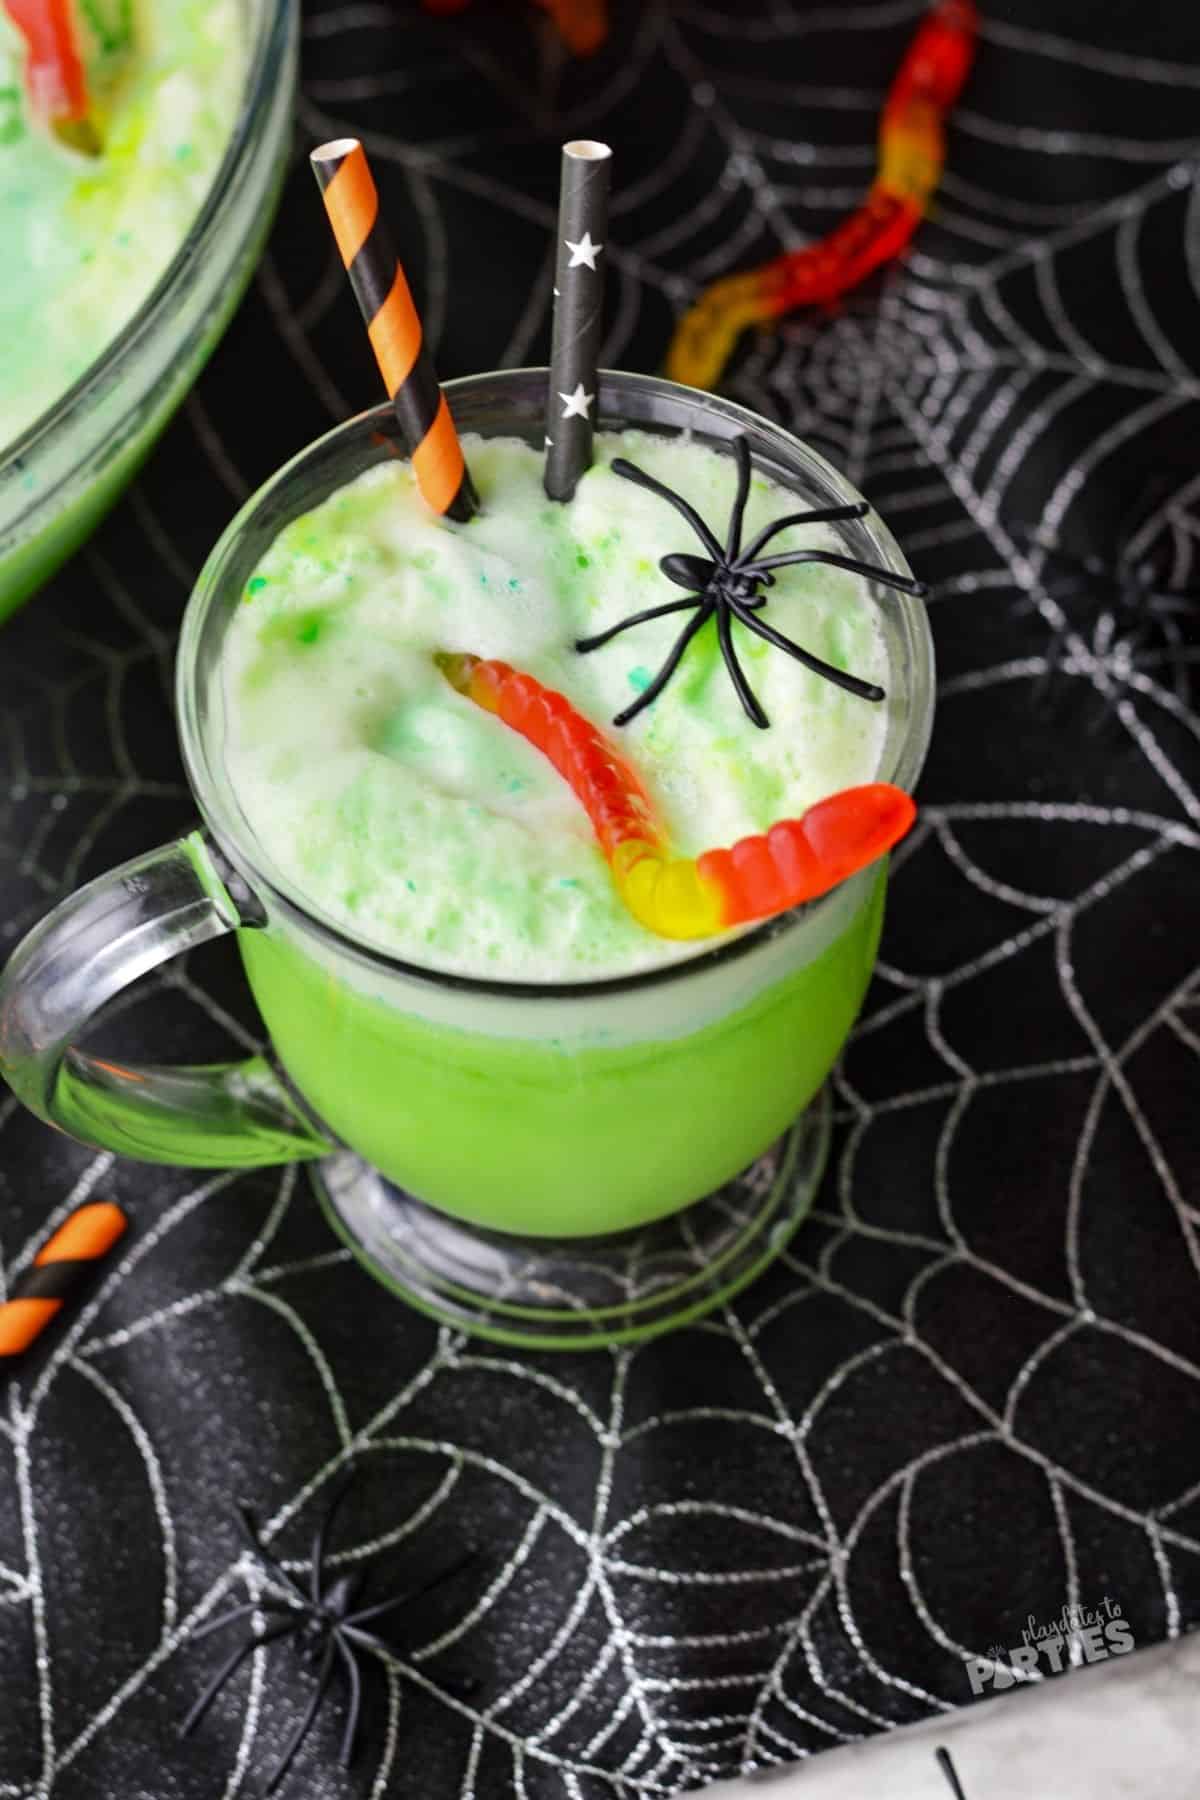 Top view of a glass mug filled with frothy green Halloween punch garnished with gummy worms and plastic spiders.